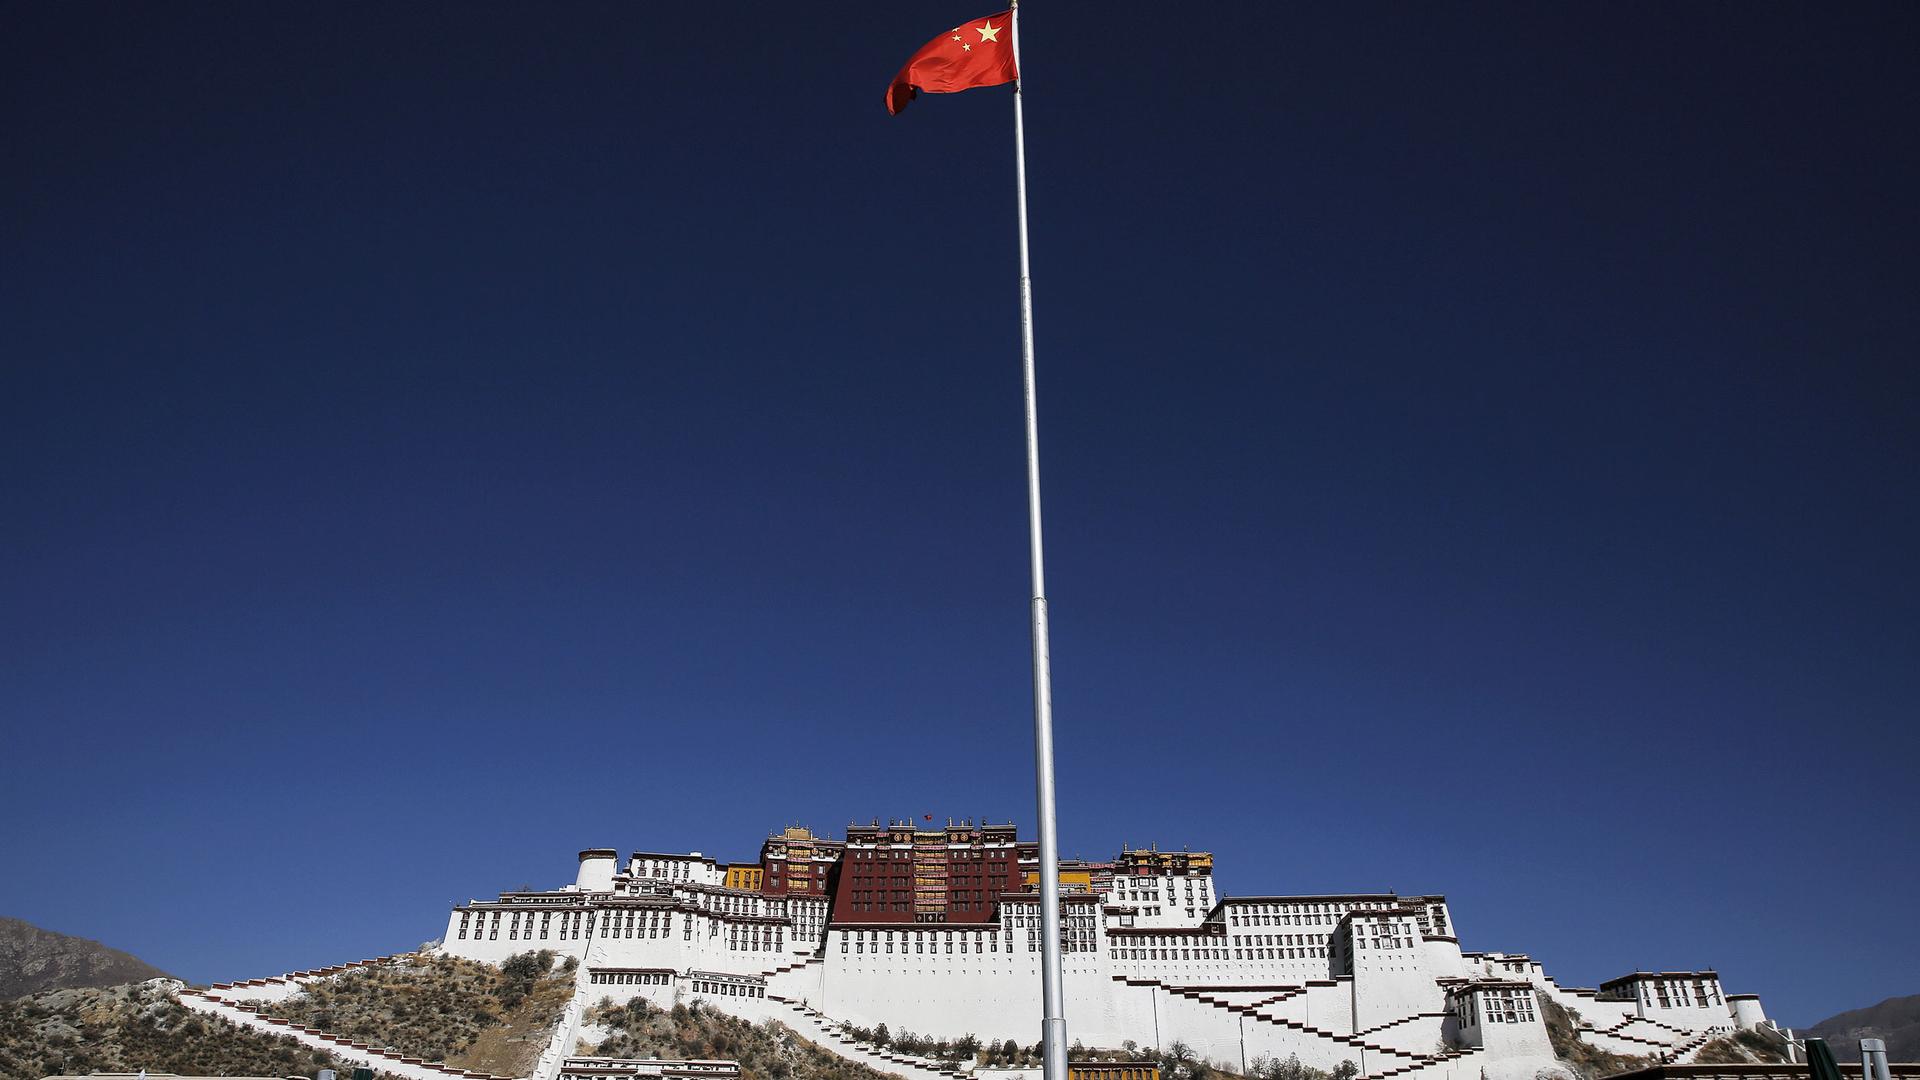 China's red flag is show flying on a pole with the large white facade of the Potala Palace in the distance.